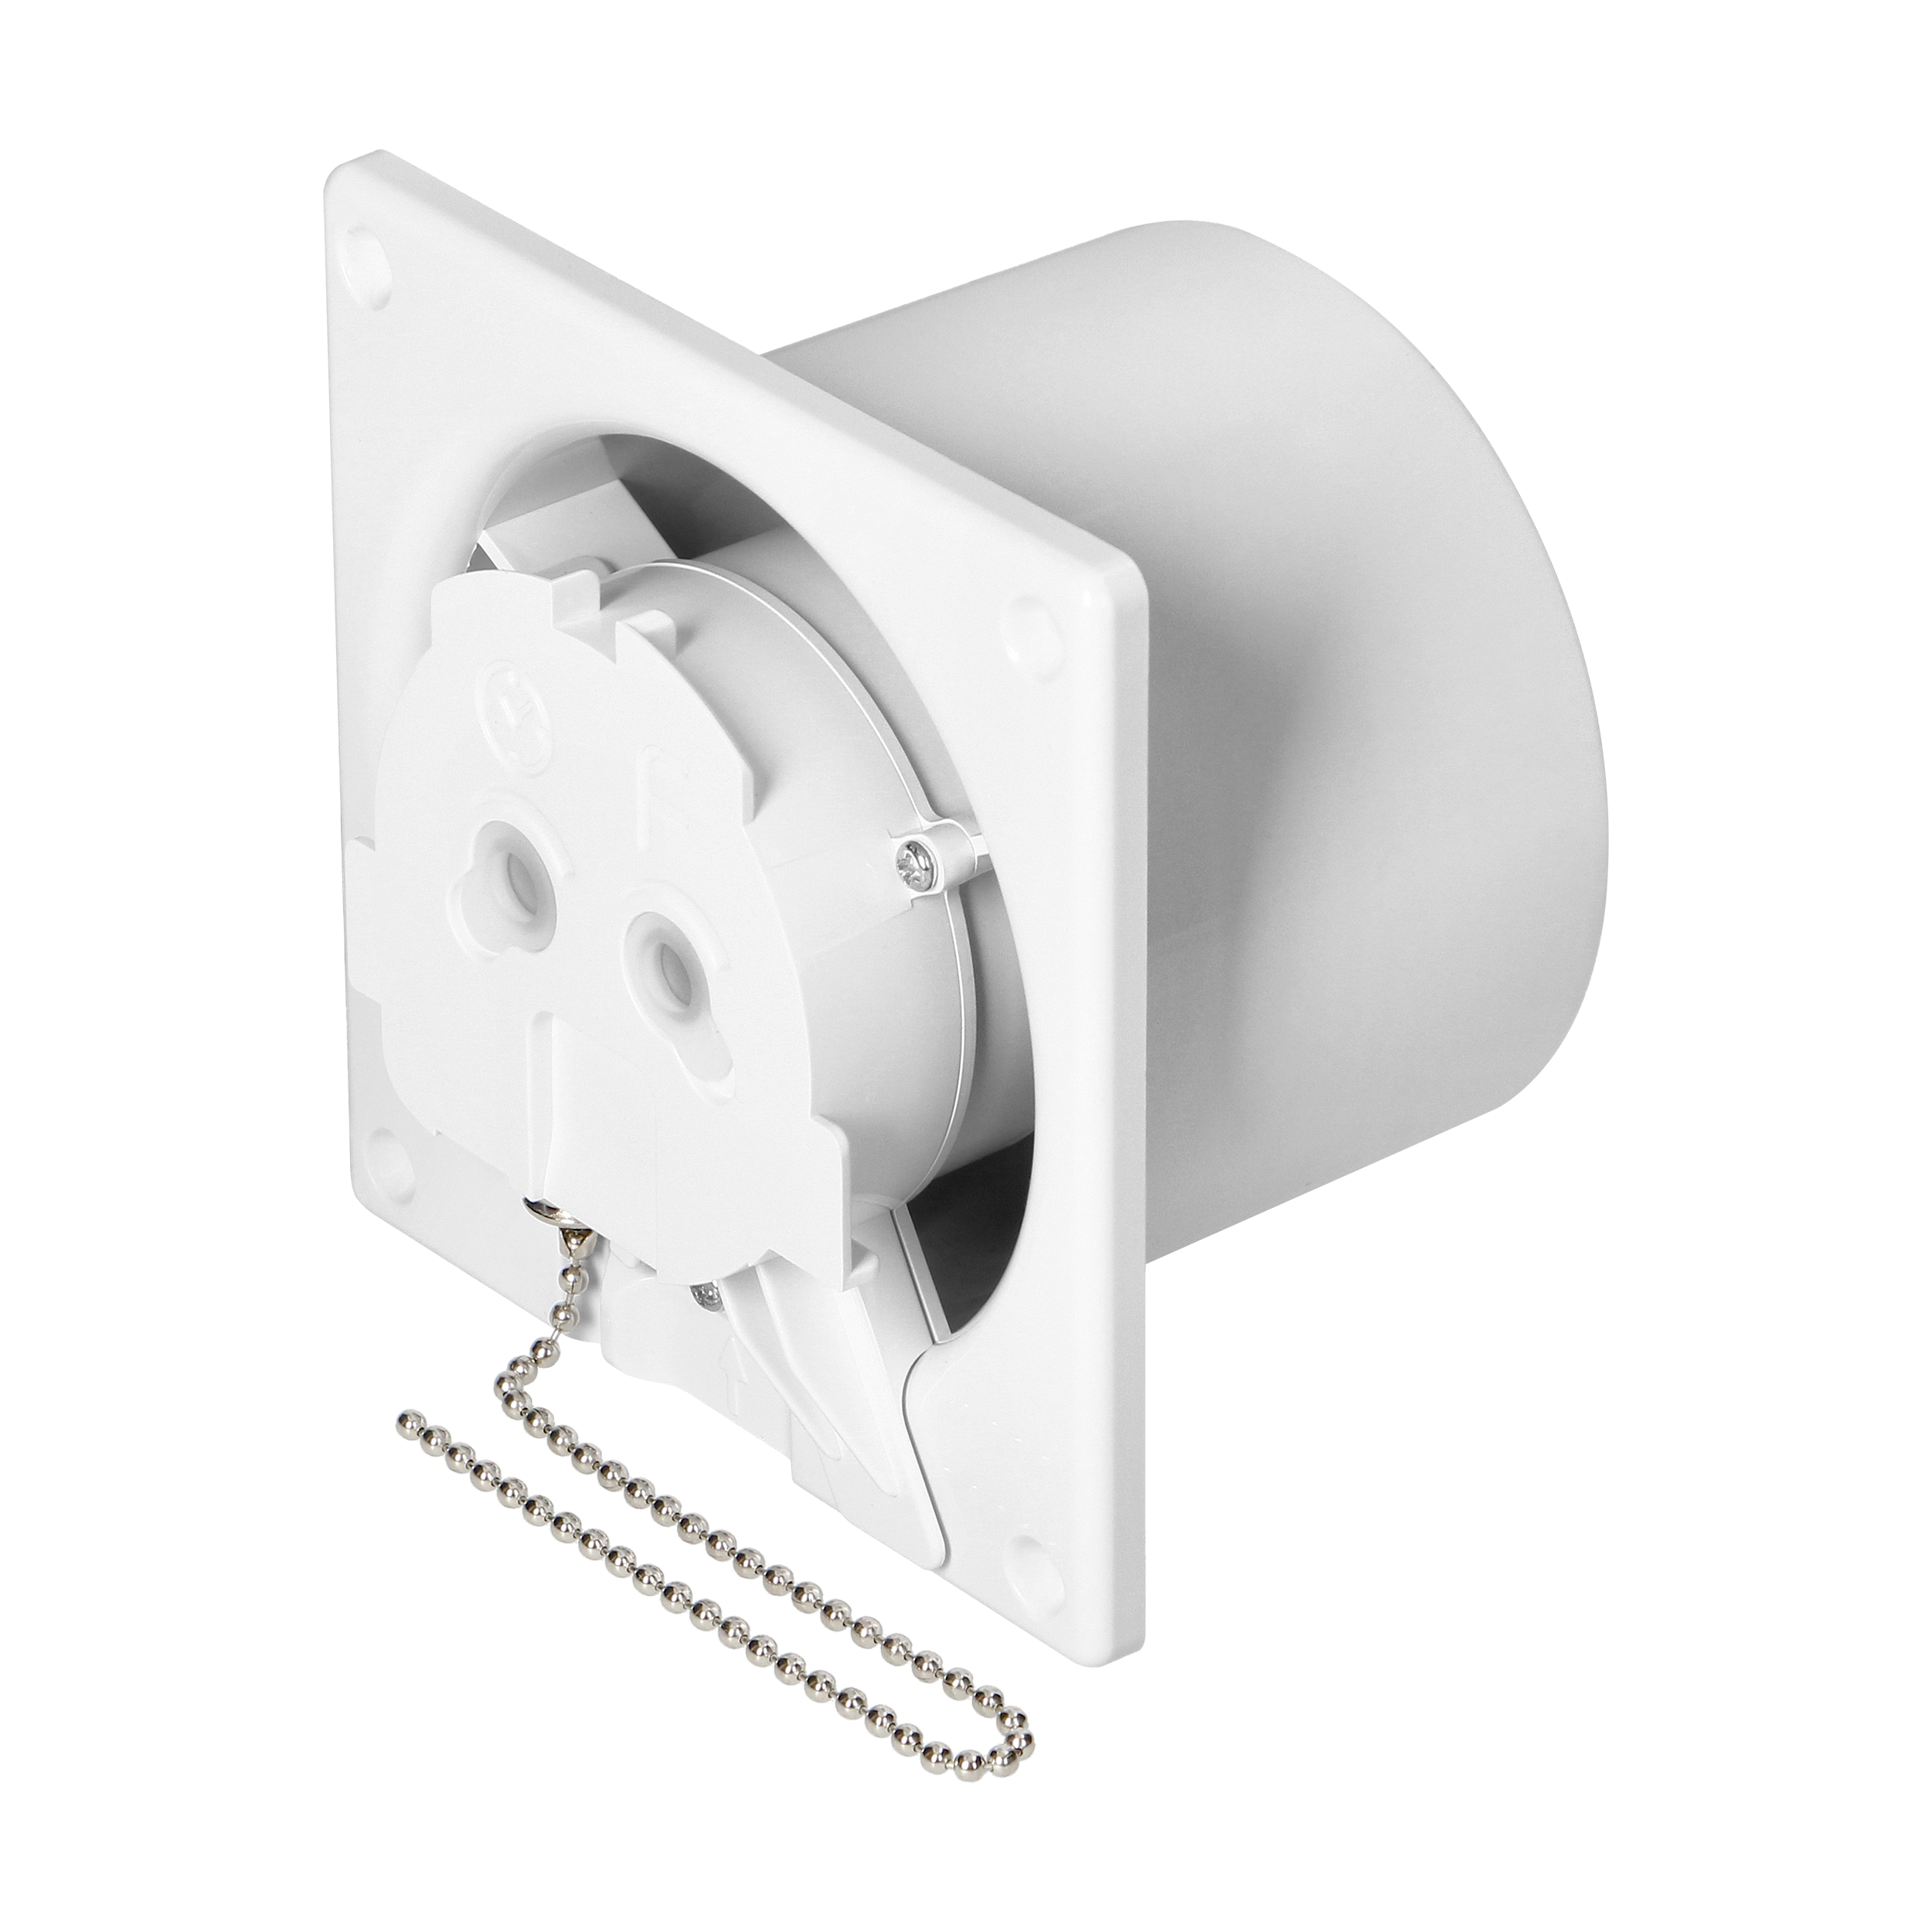 Bathroom fan 100mm - Premium - cord with switch and ball bearings